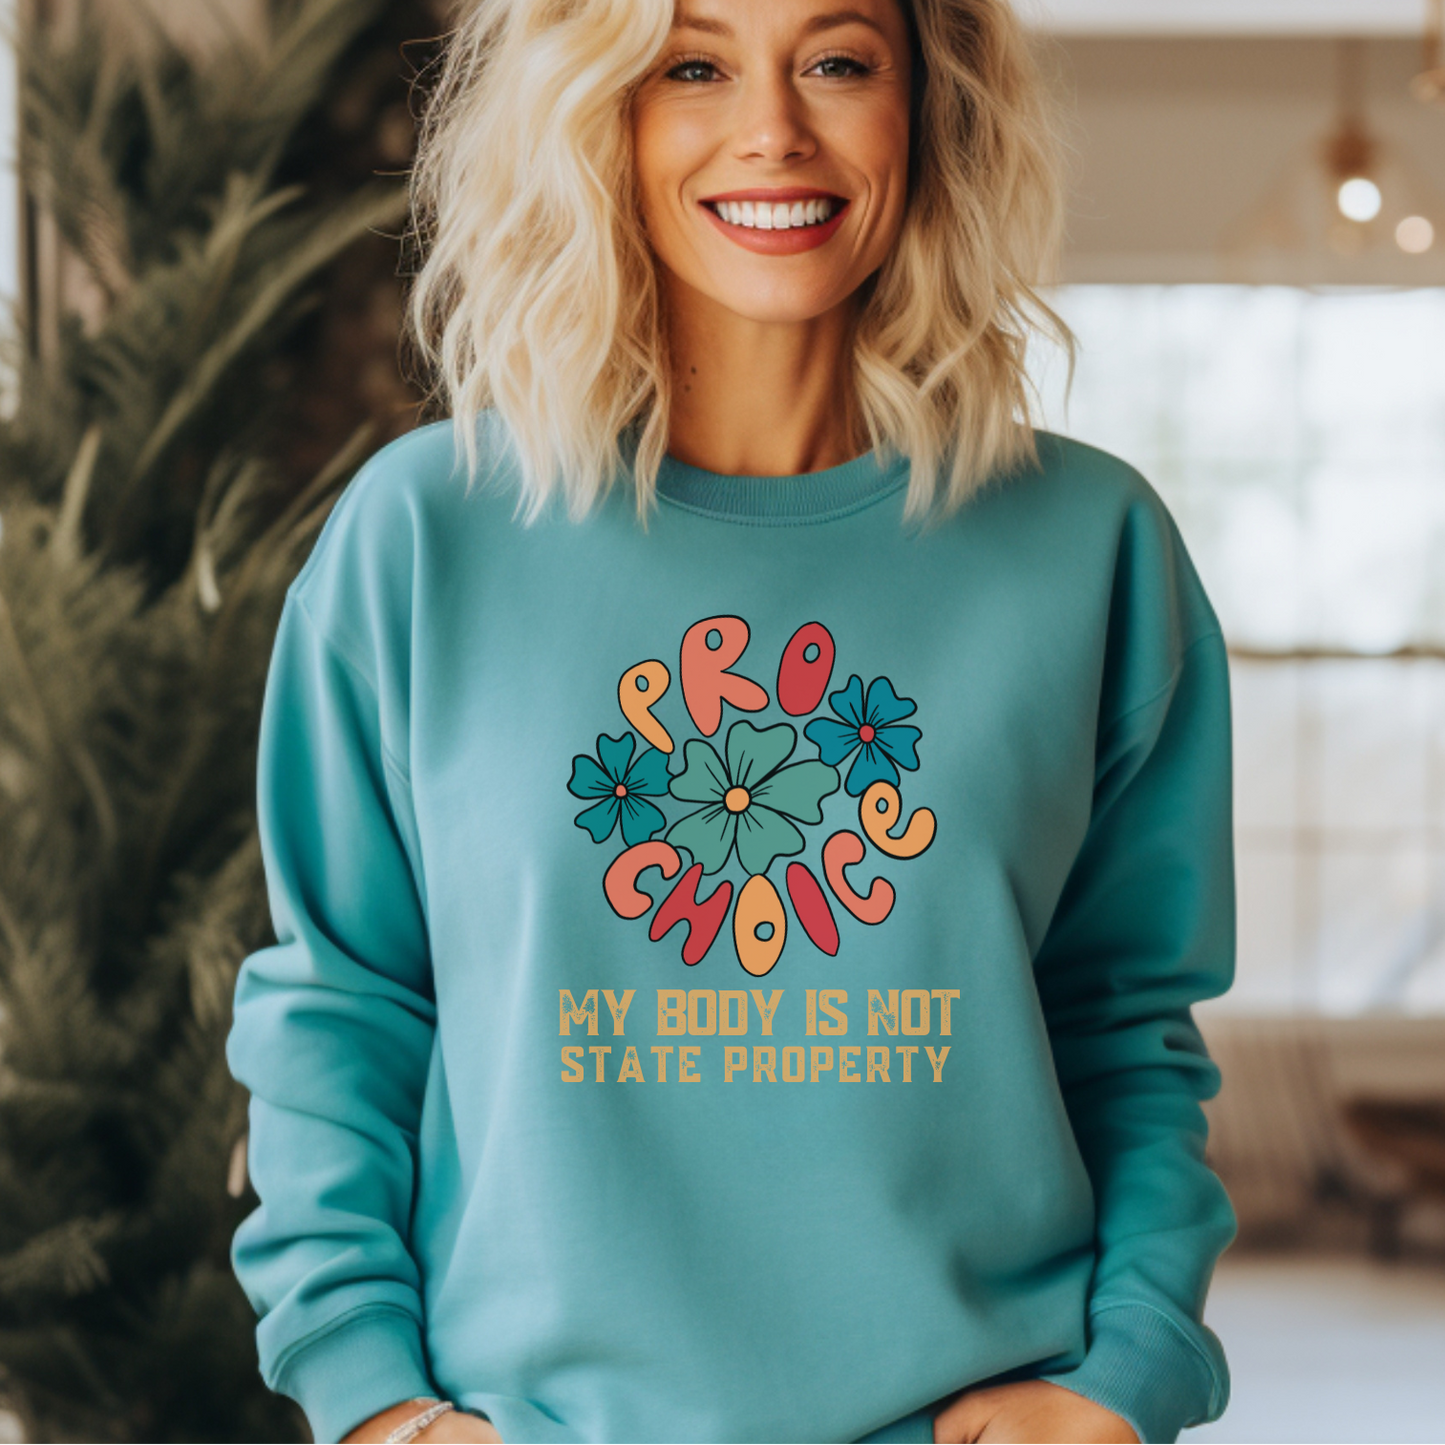 Stay warm and vocal with our seafoam-colored pro-choice message sweatshirt. Order in the same or matching colors for your friends or women's organizations.